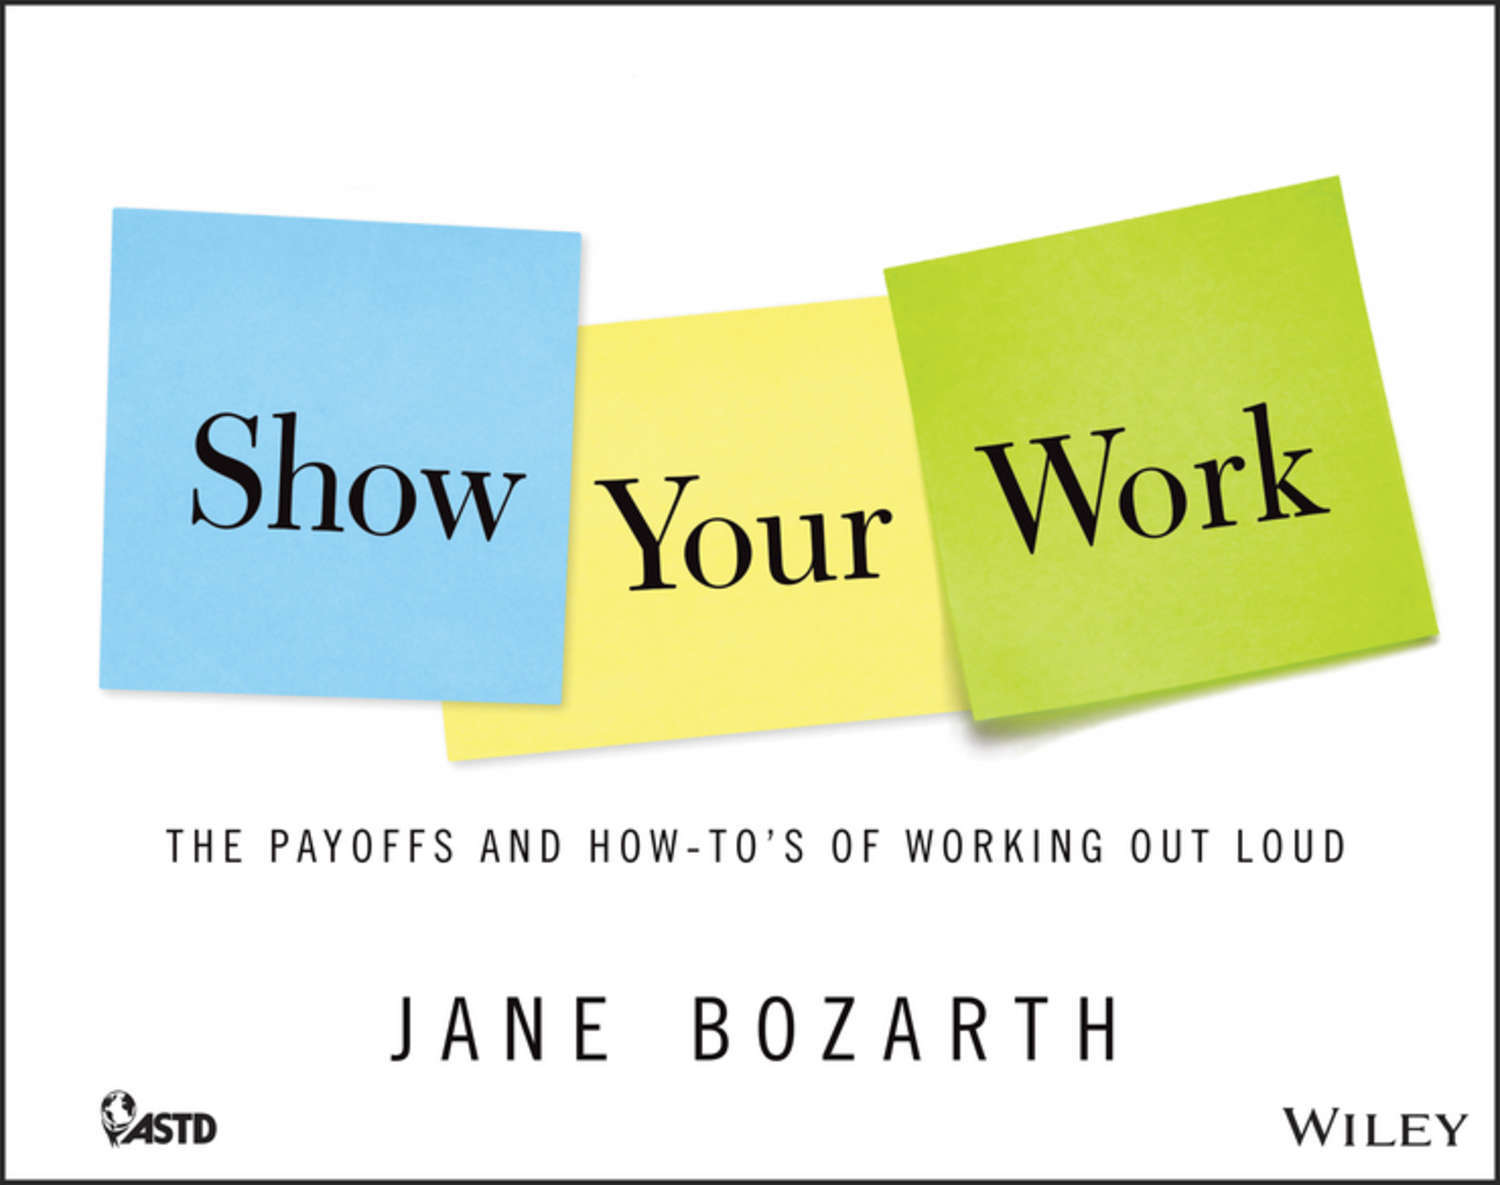 Show your work book. Payoff. Show me your book. Show your work